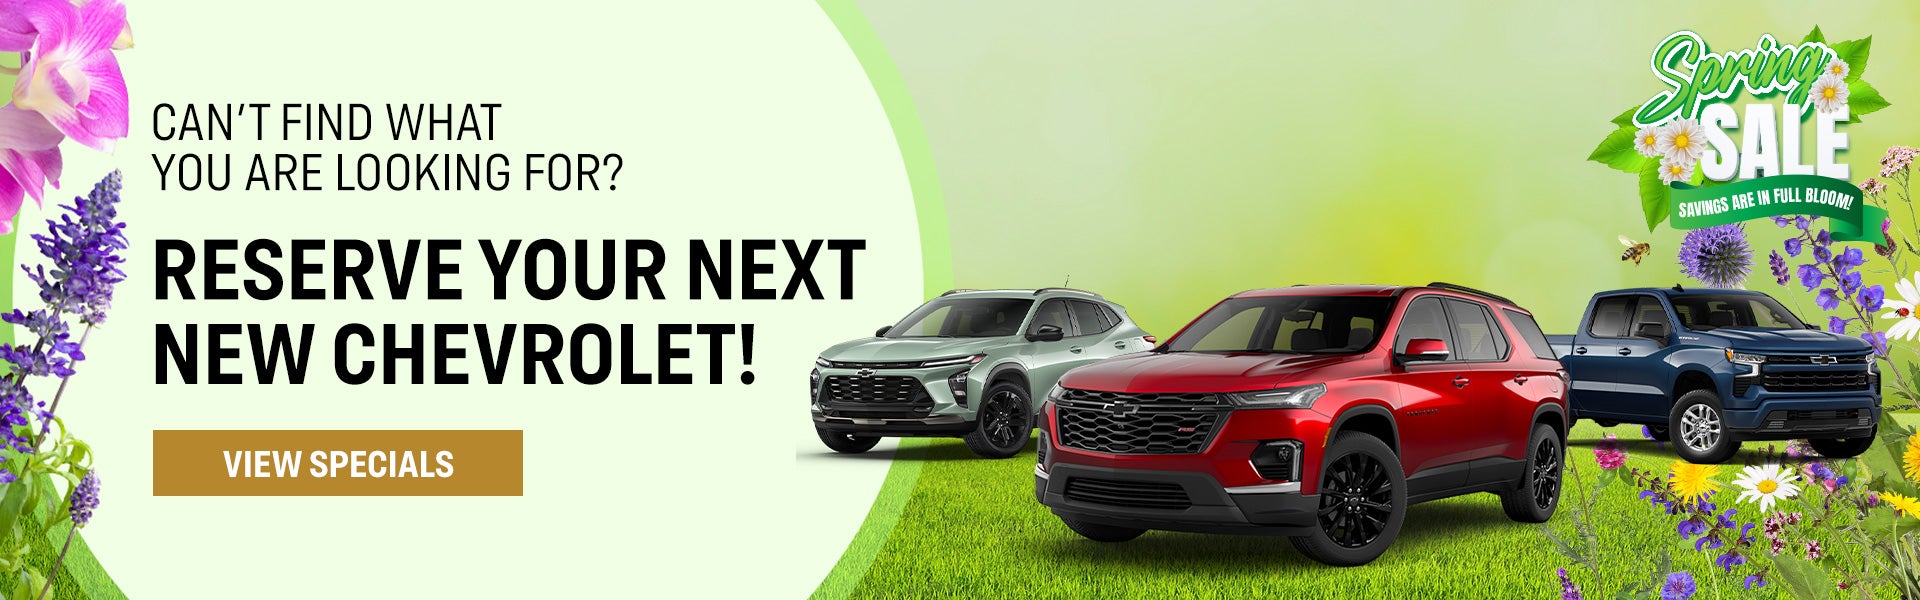 Reserve Your Next New Chevrolet!